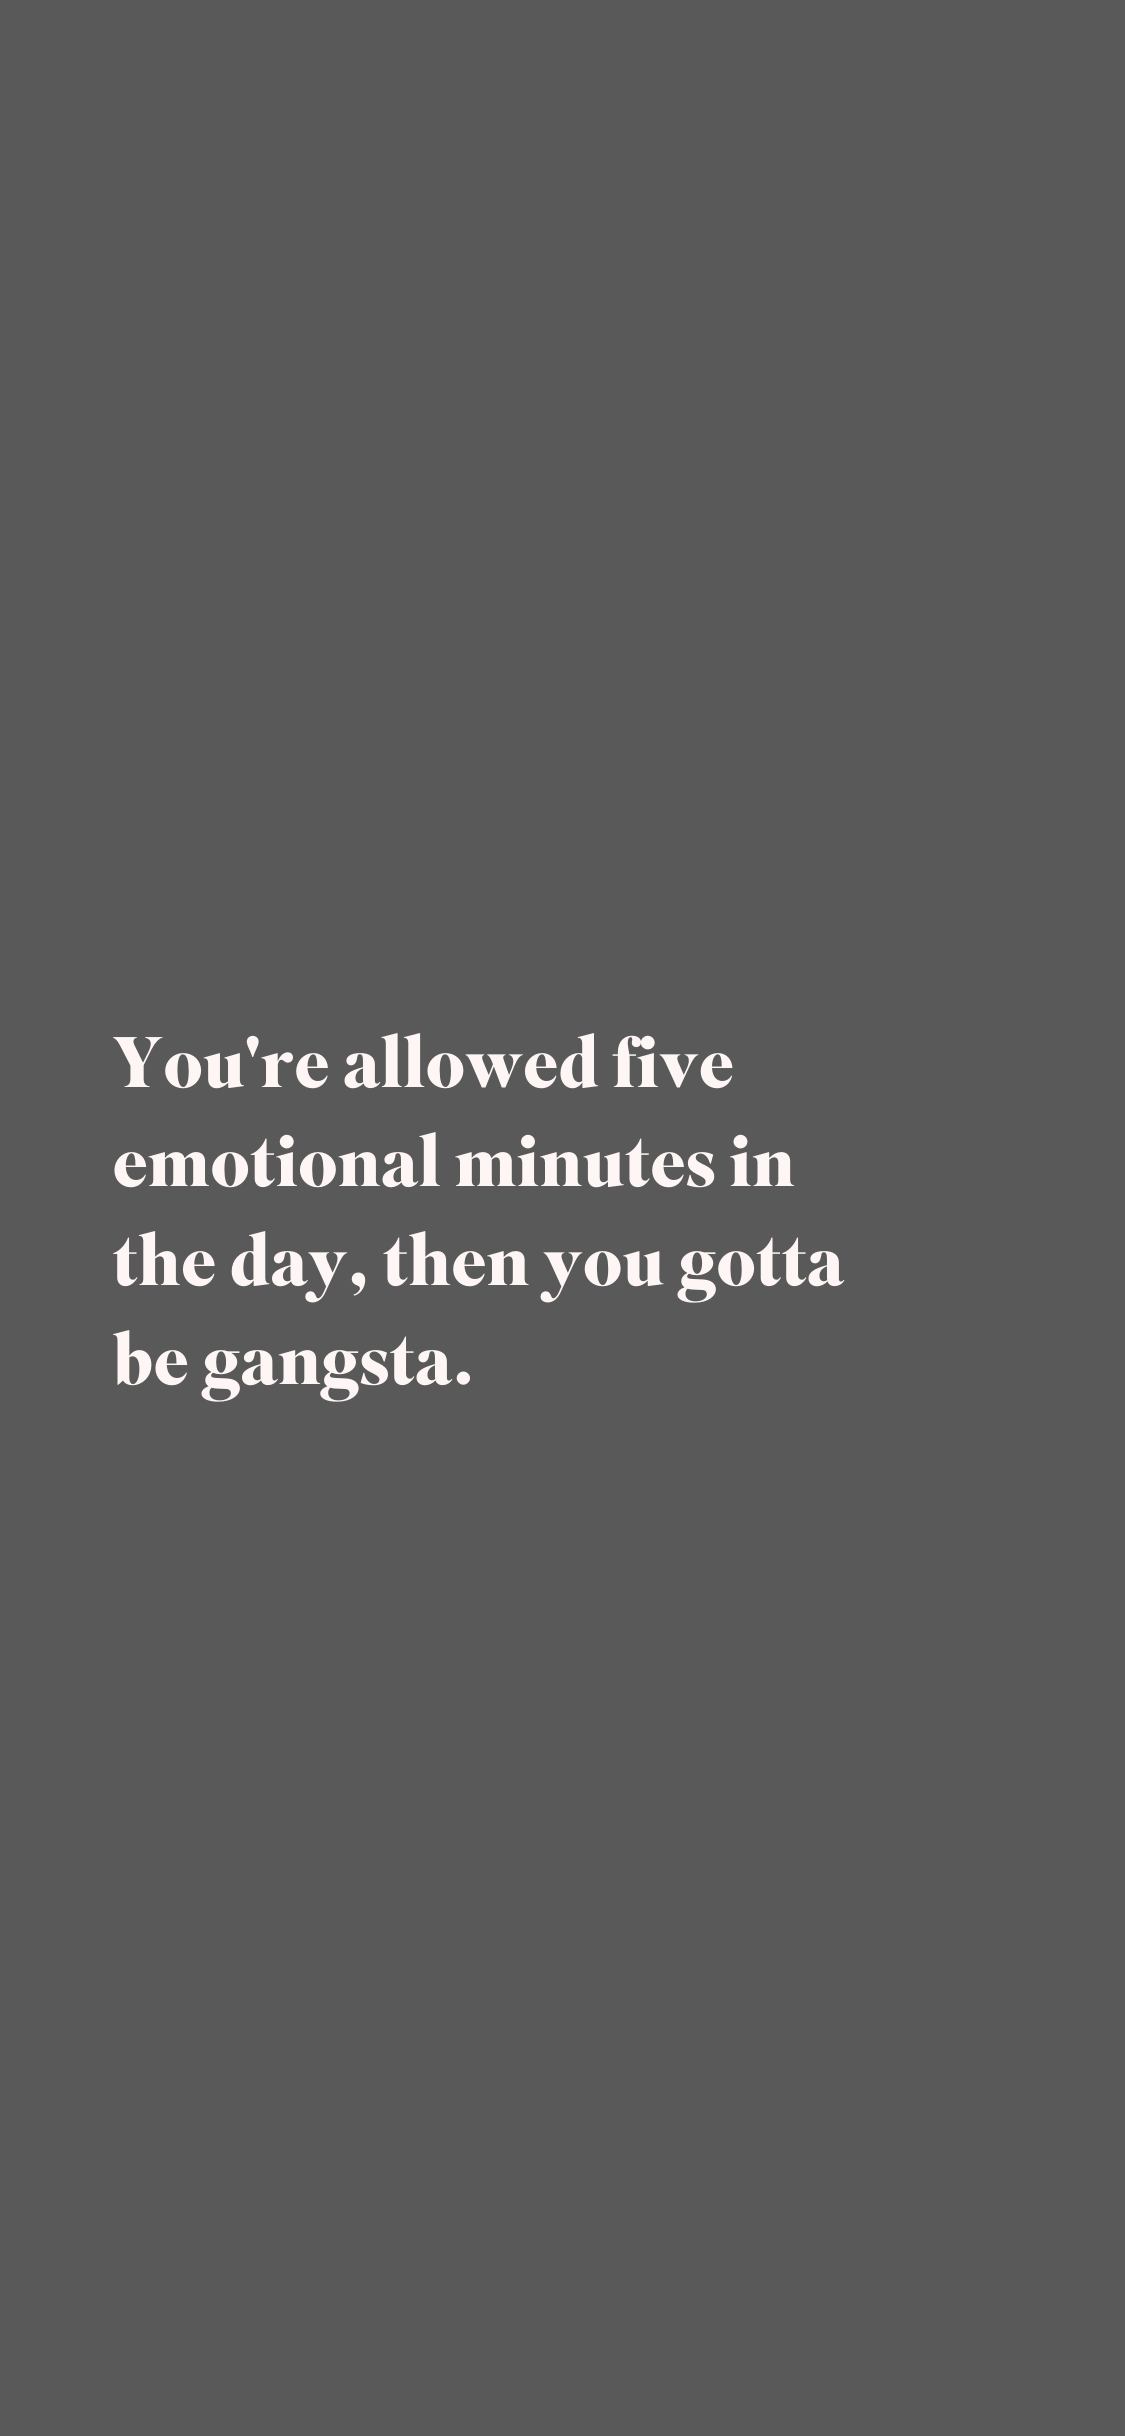 Positive quotes: You're allowed five emotional minutes in the day, then you gotta be gangsta.